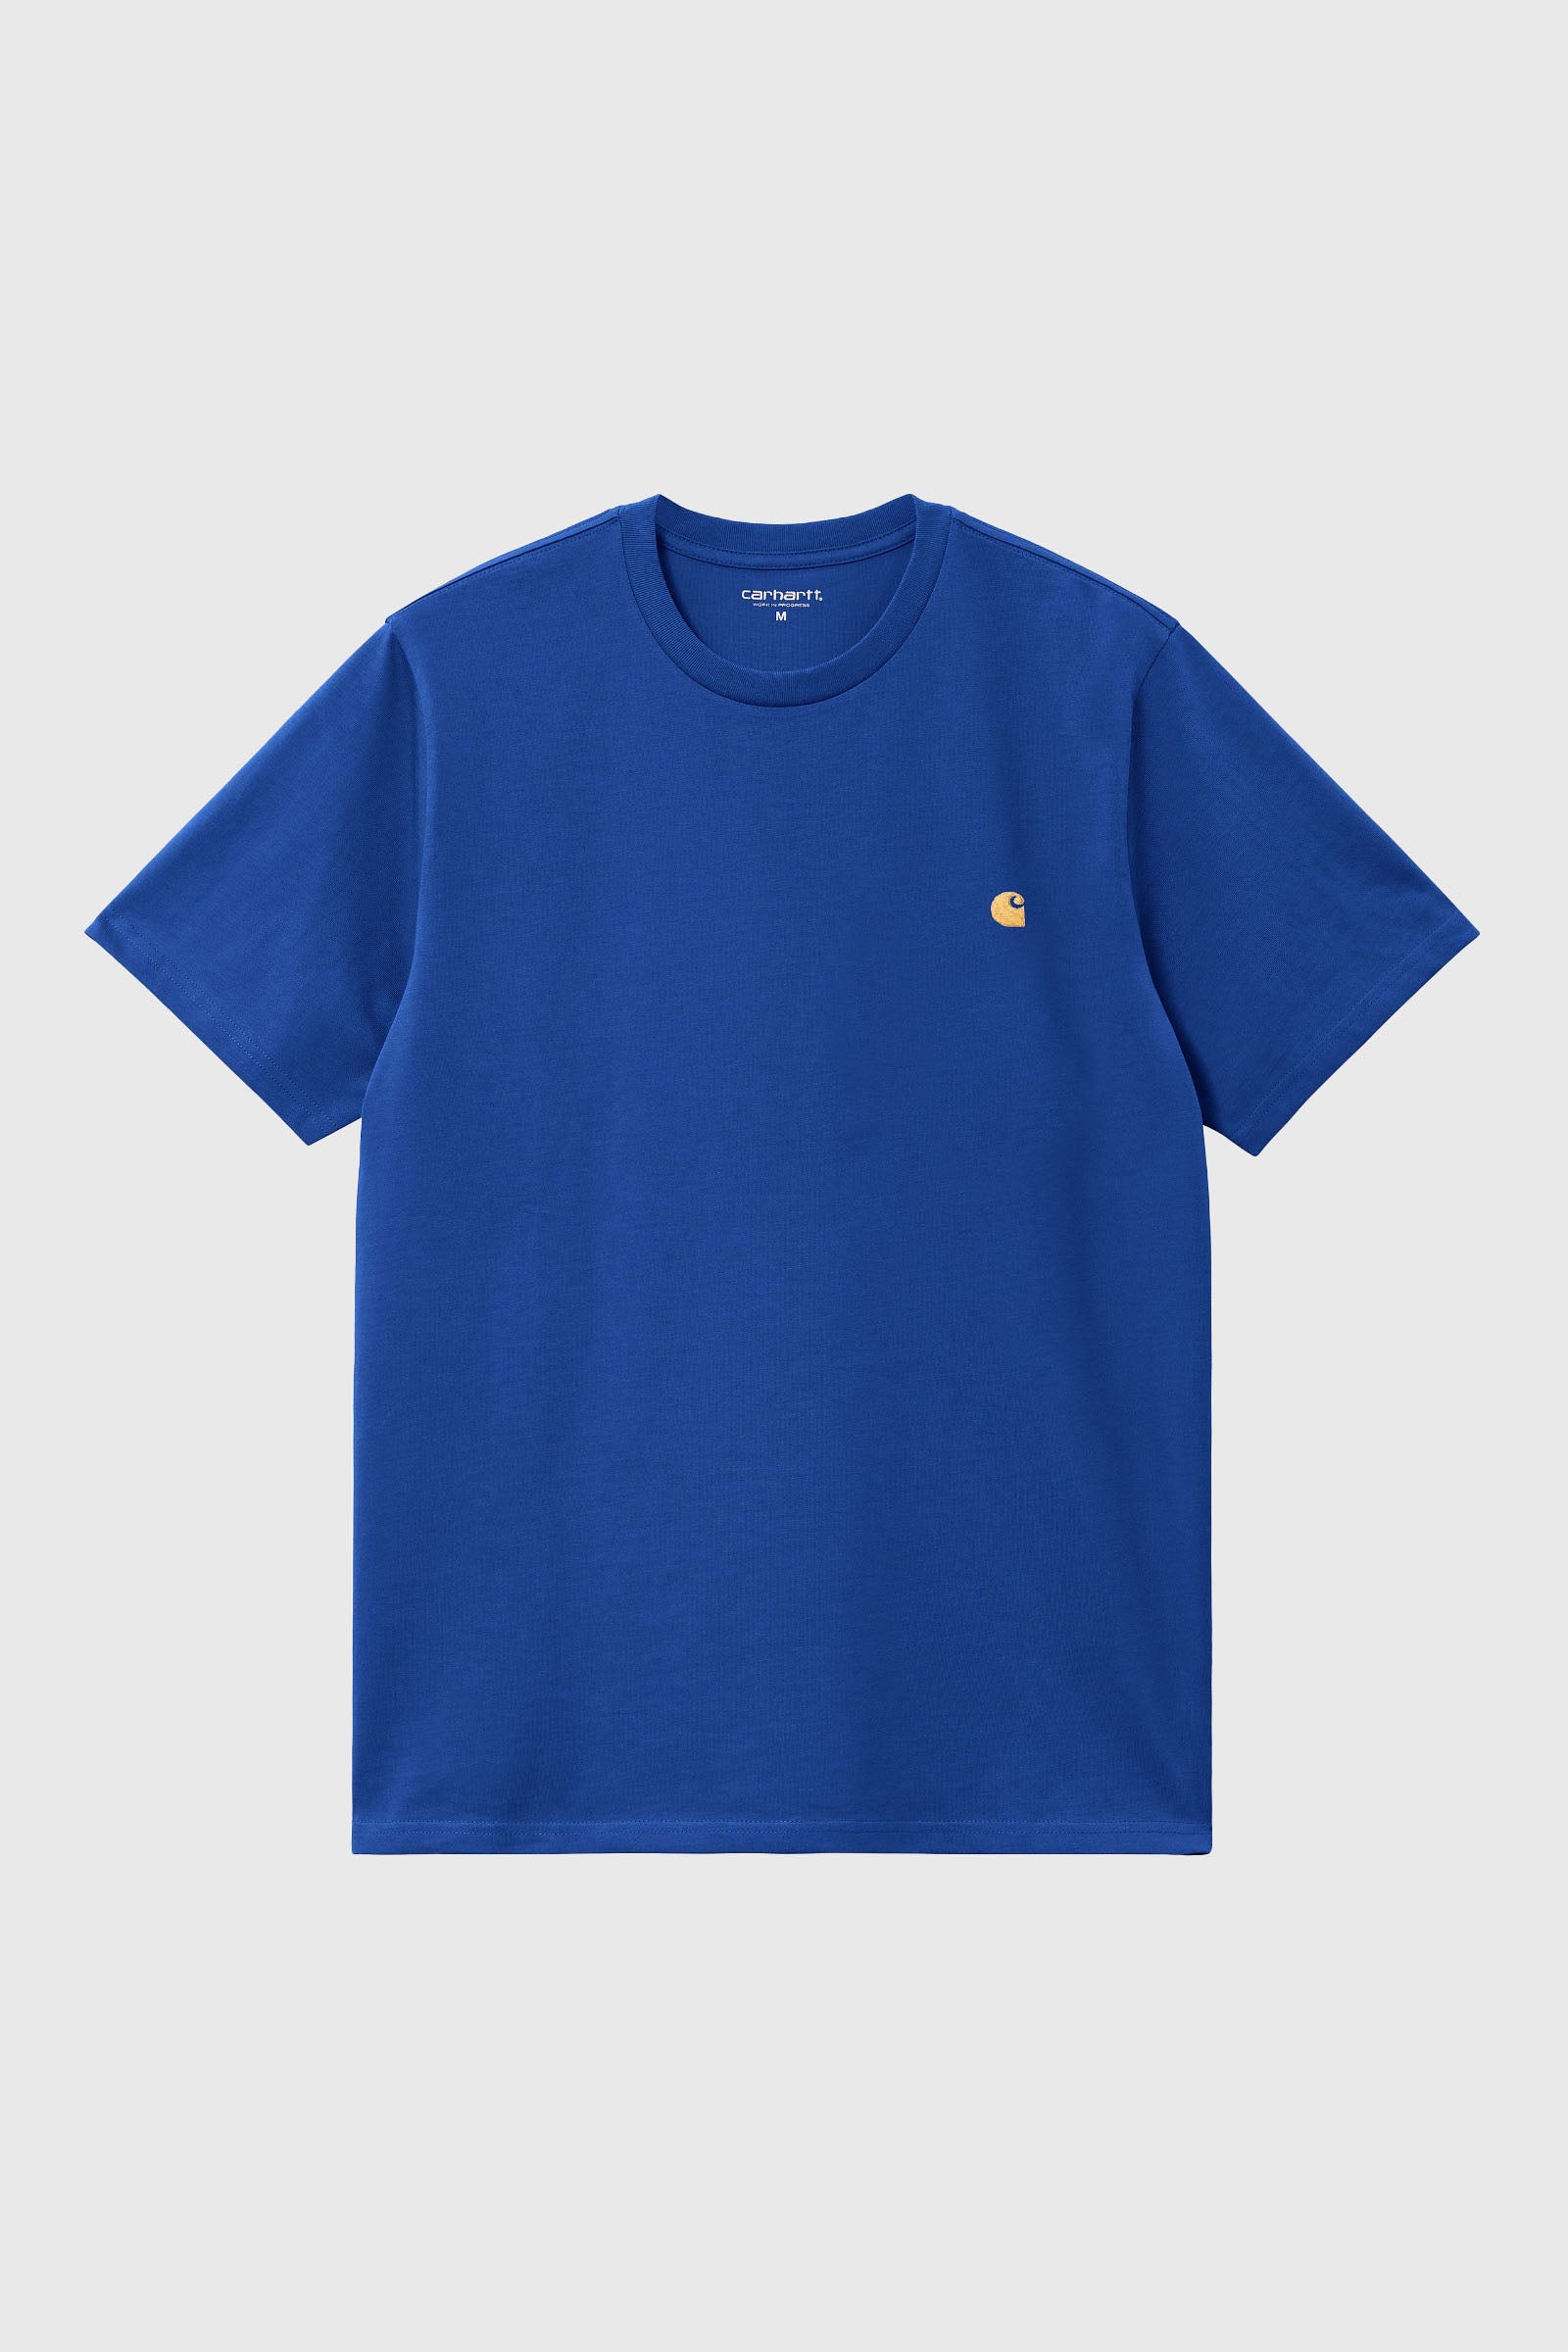 Carhartt WIP T-Shirt S/S Chase Cotton Royal - 1